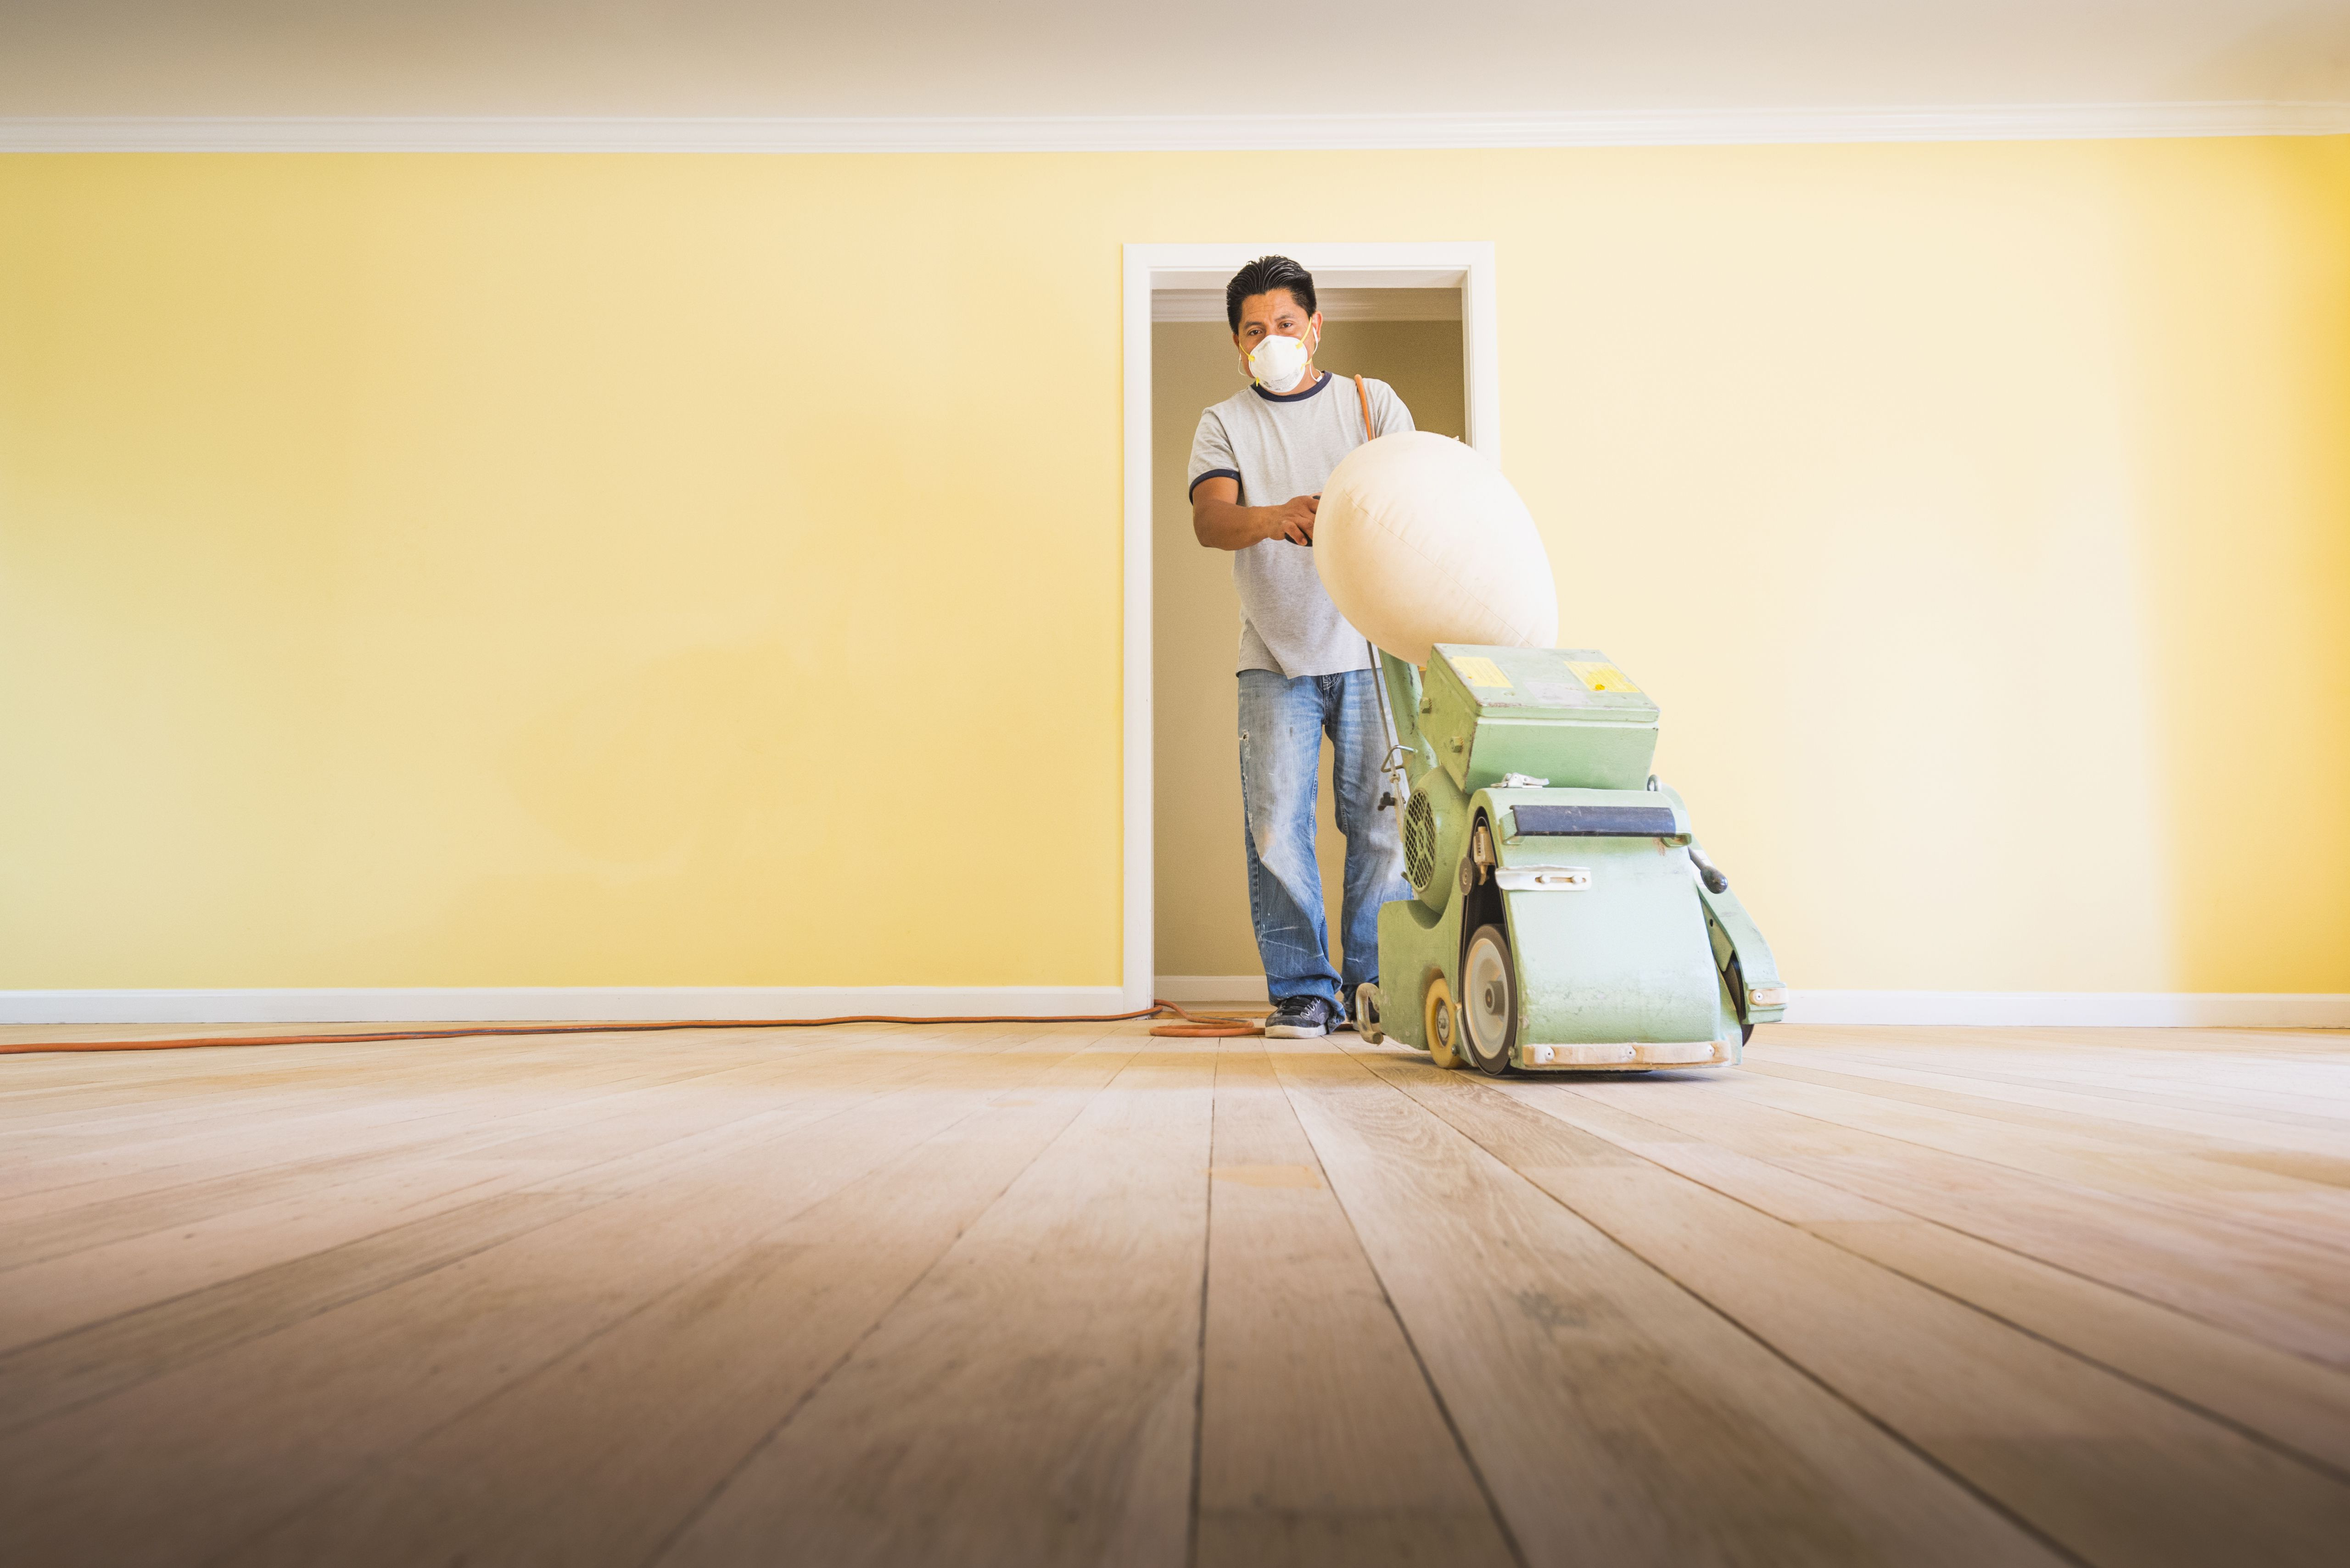 13 Popular Getting Paint Off Hardwood Floors 2023 free download getting paint off hardwood floors of should you paint walls or refinish floors first intended for floorsandingafterpainting 5a8f08dfae9ab80037d9d878